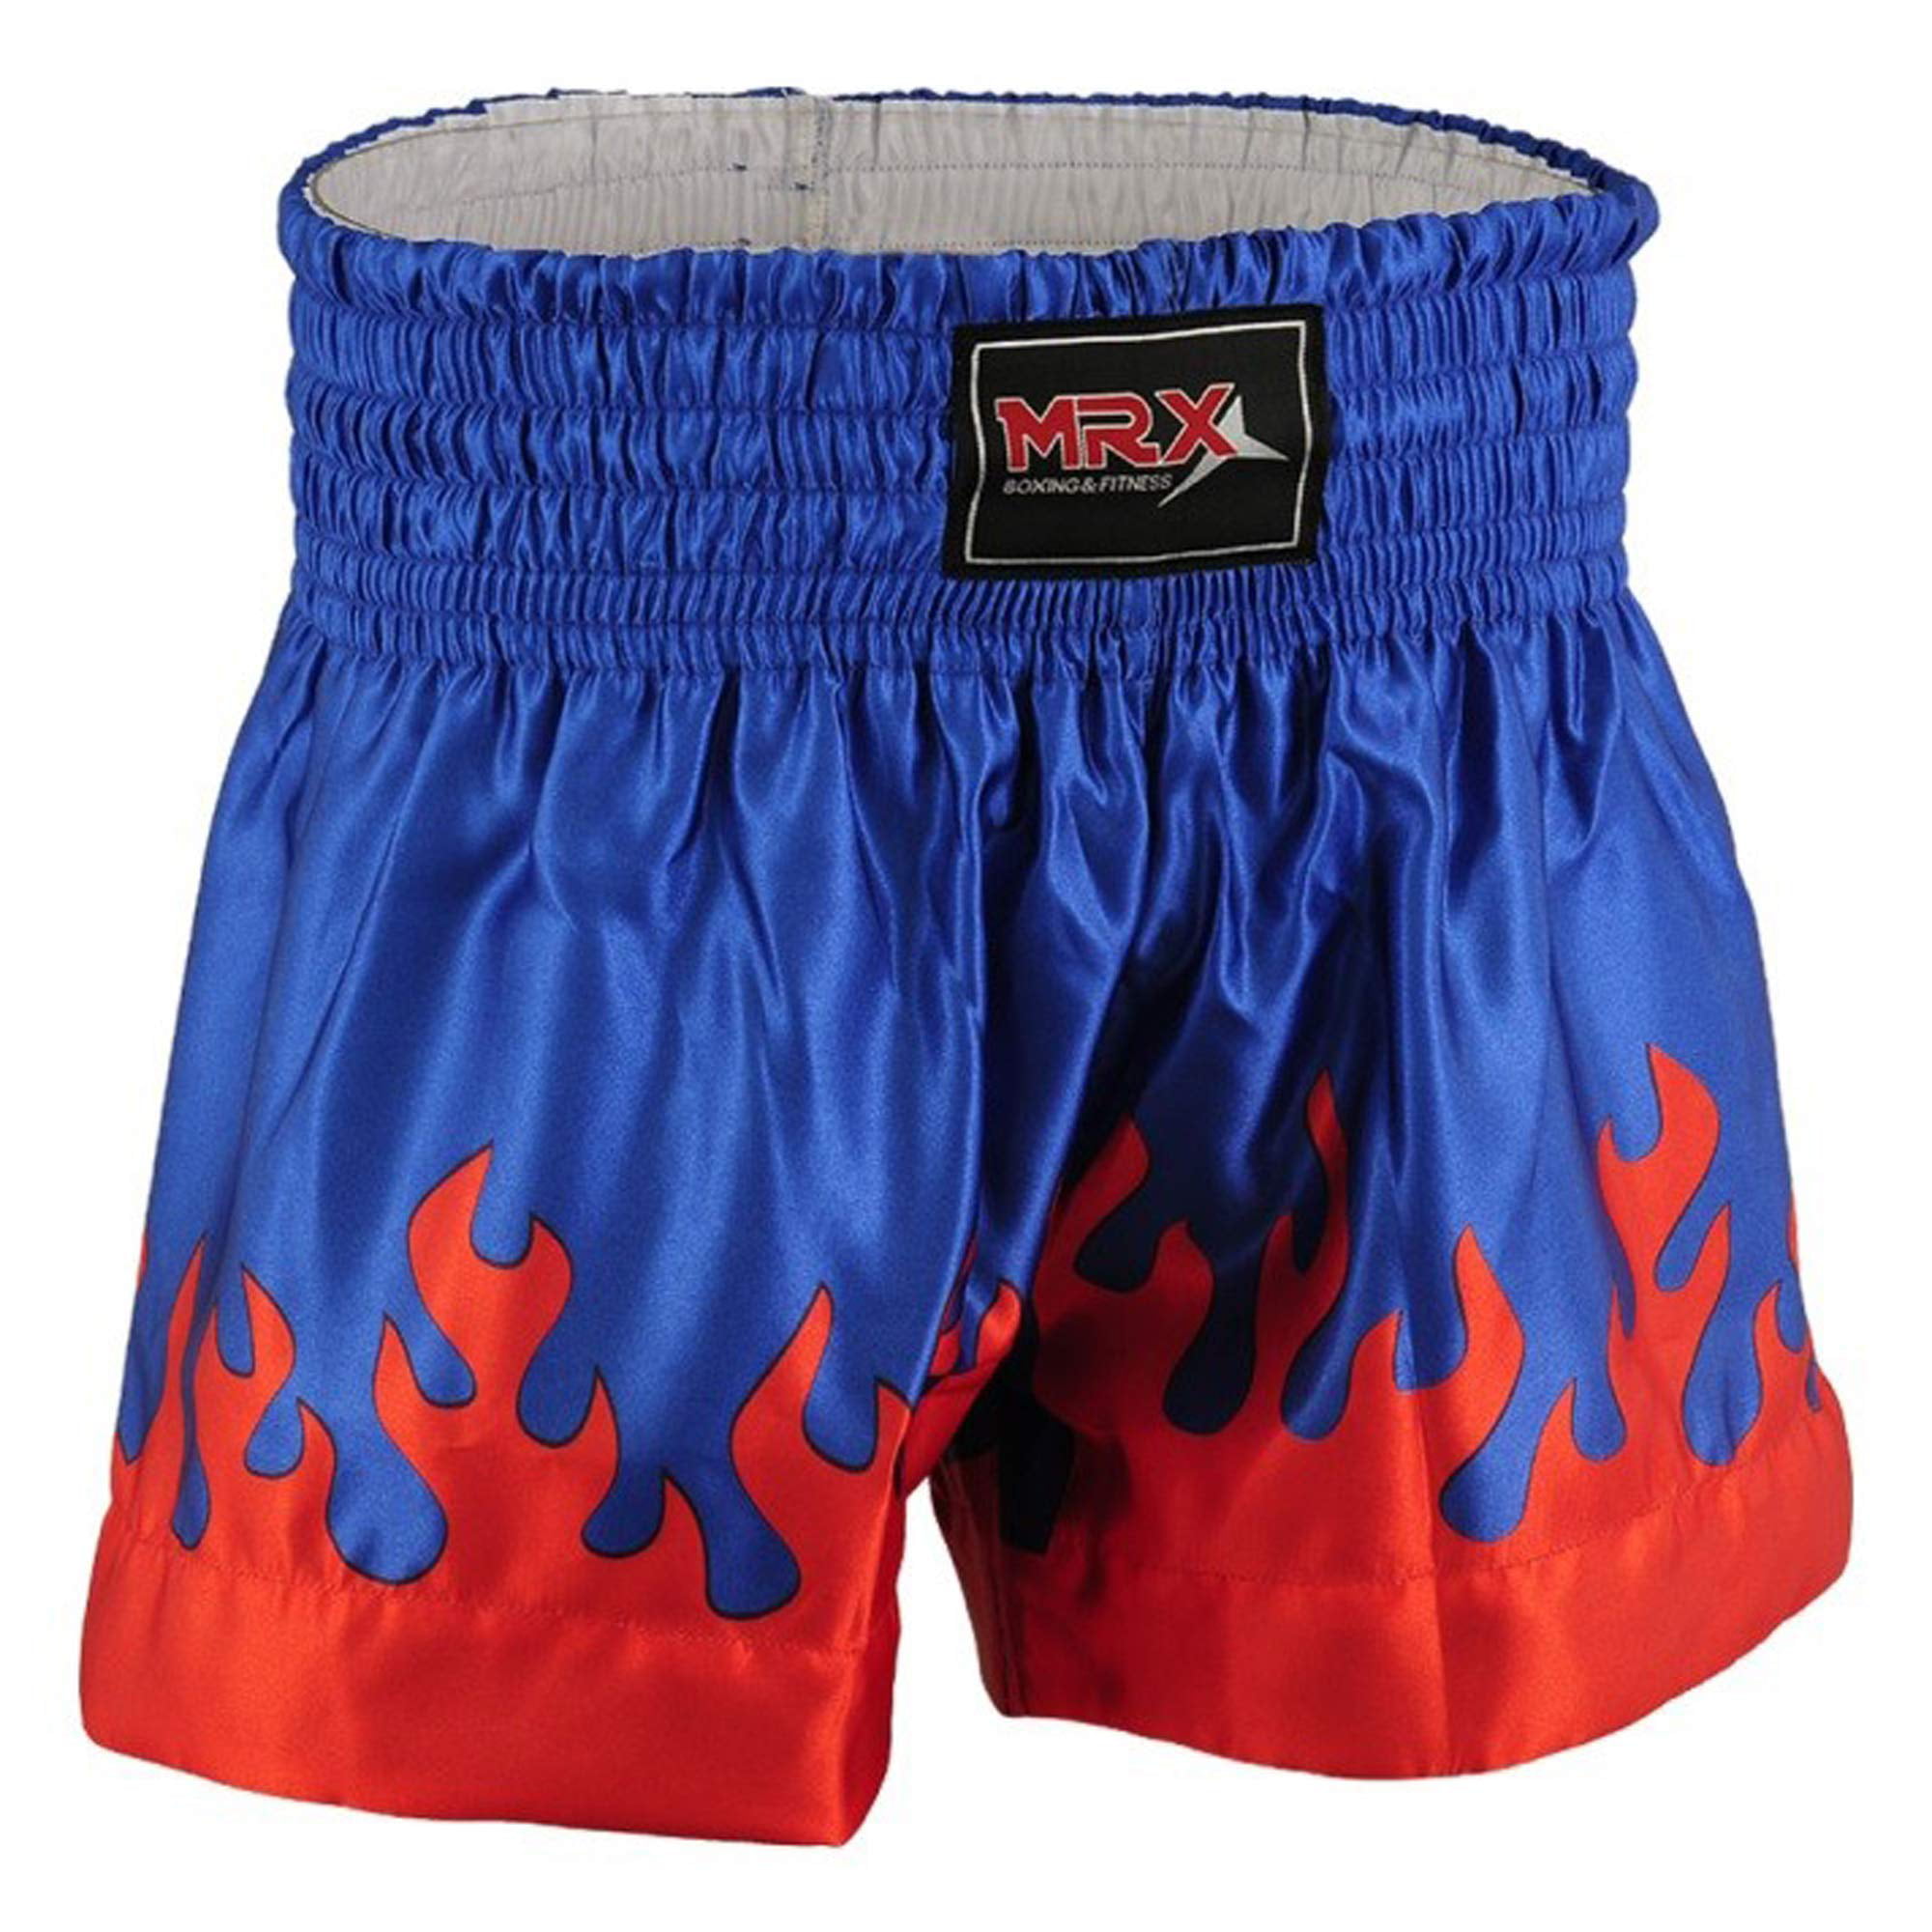 Kids/Adult Boxing Shorts Kickboxing Fighting Printed Elastic waist Breathable 